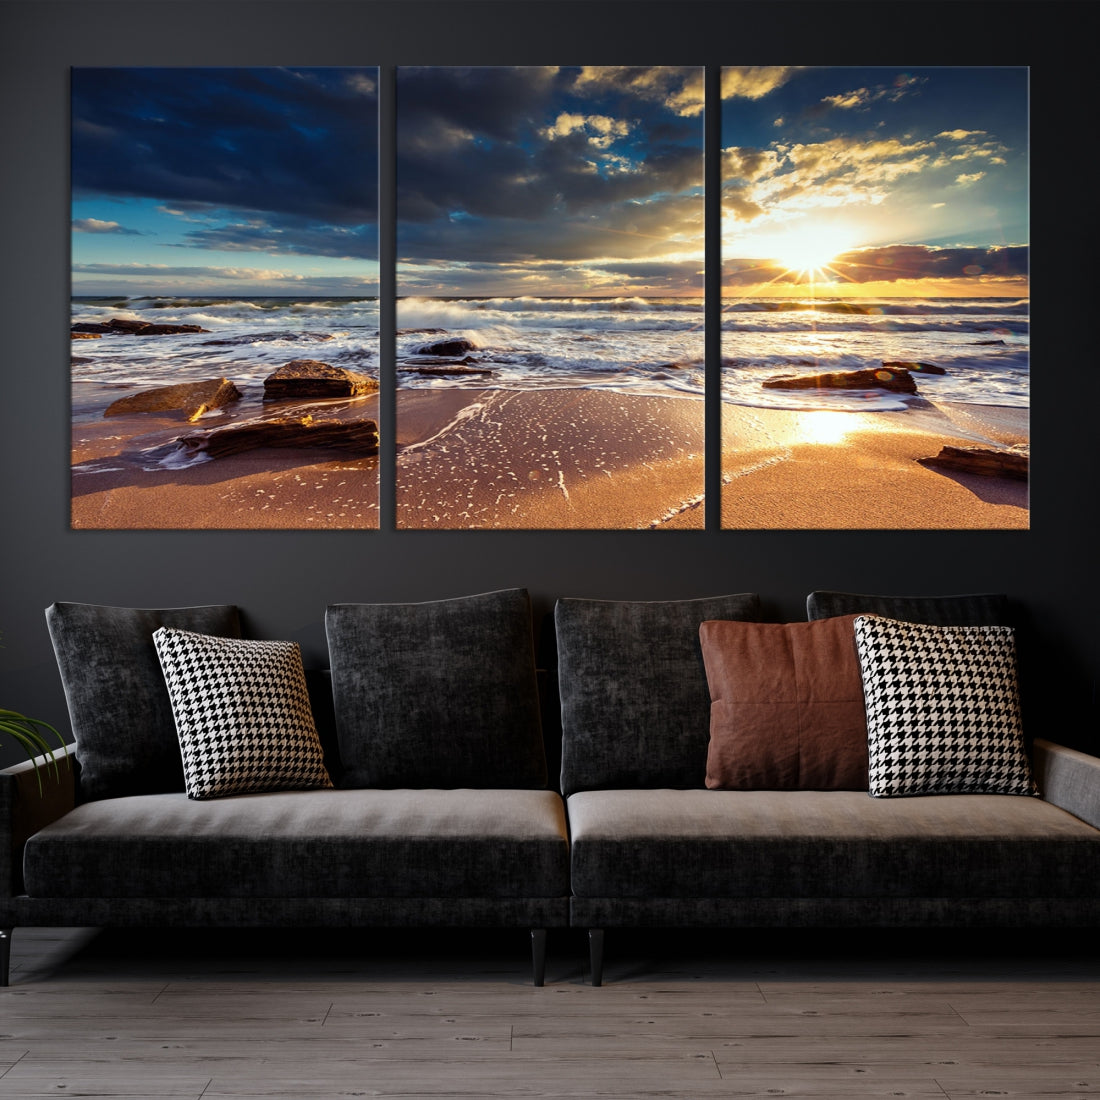 Seascape Sunset to Your Home with Our Beach Wall Art Canvas Print